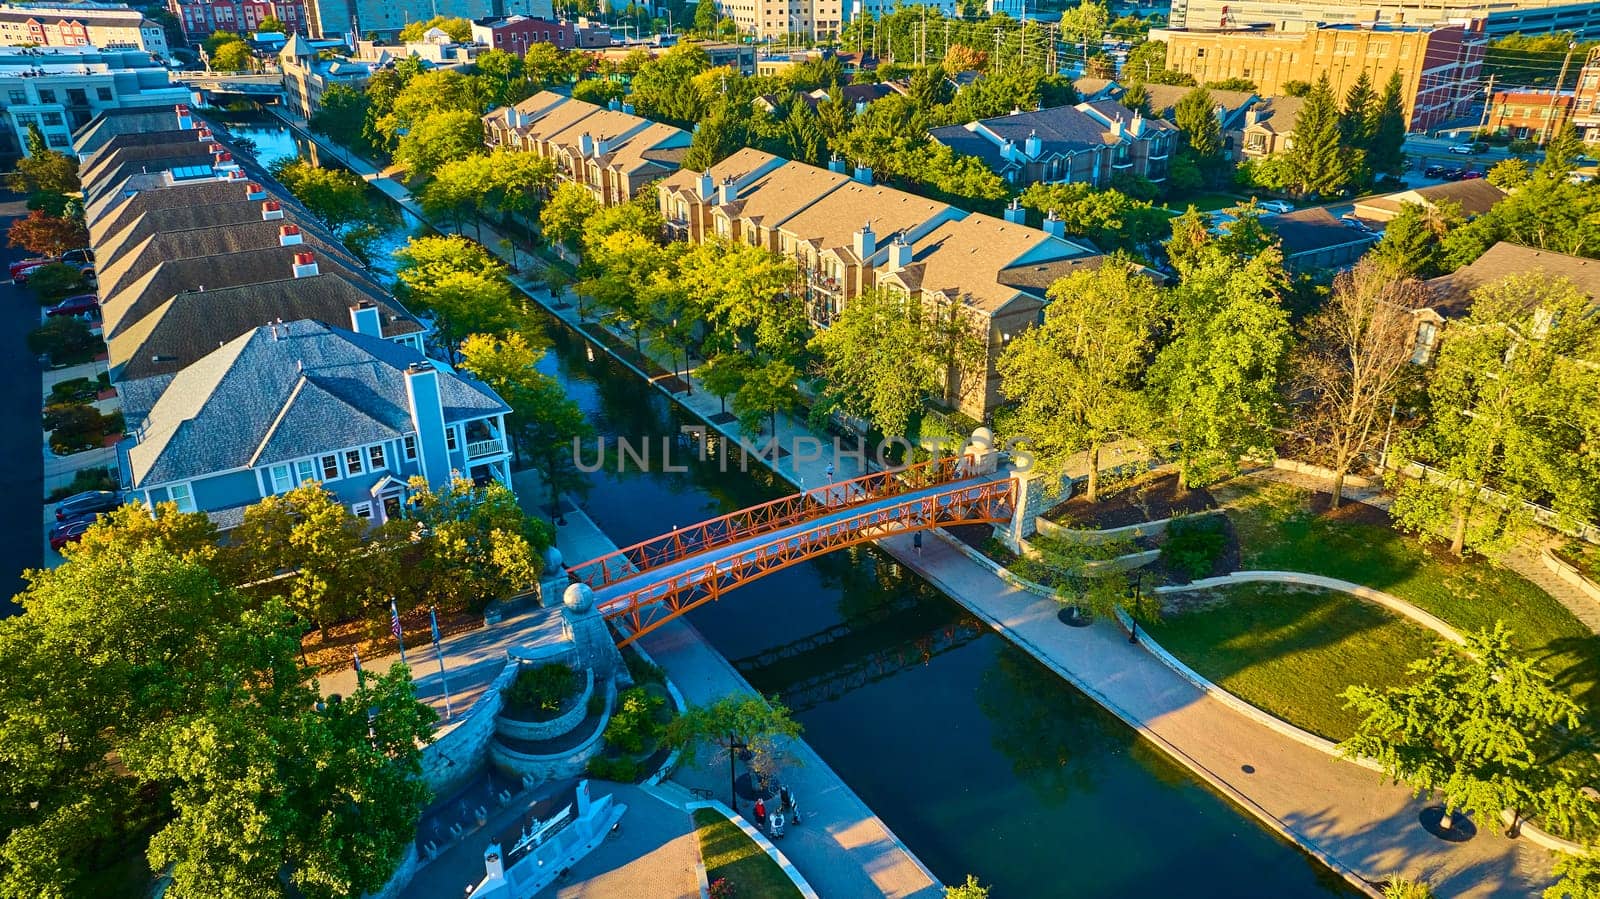 Golden Hour Over Indianapolis Canal: an Aerial View of a Red Pedestrian Bridge, Gabled Townhouses, and Tranquil Waters